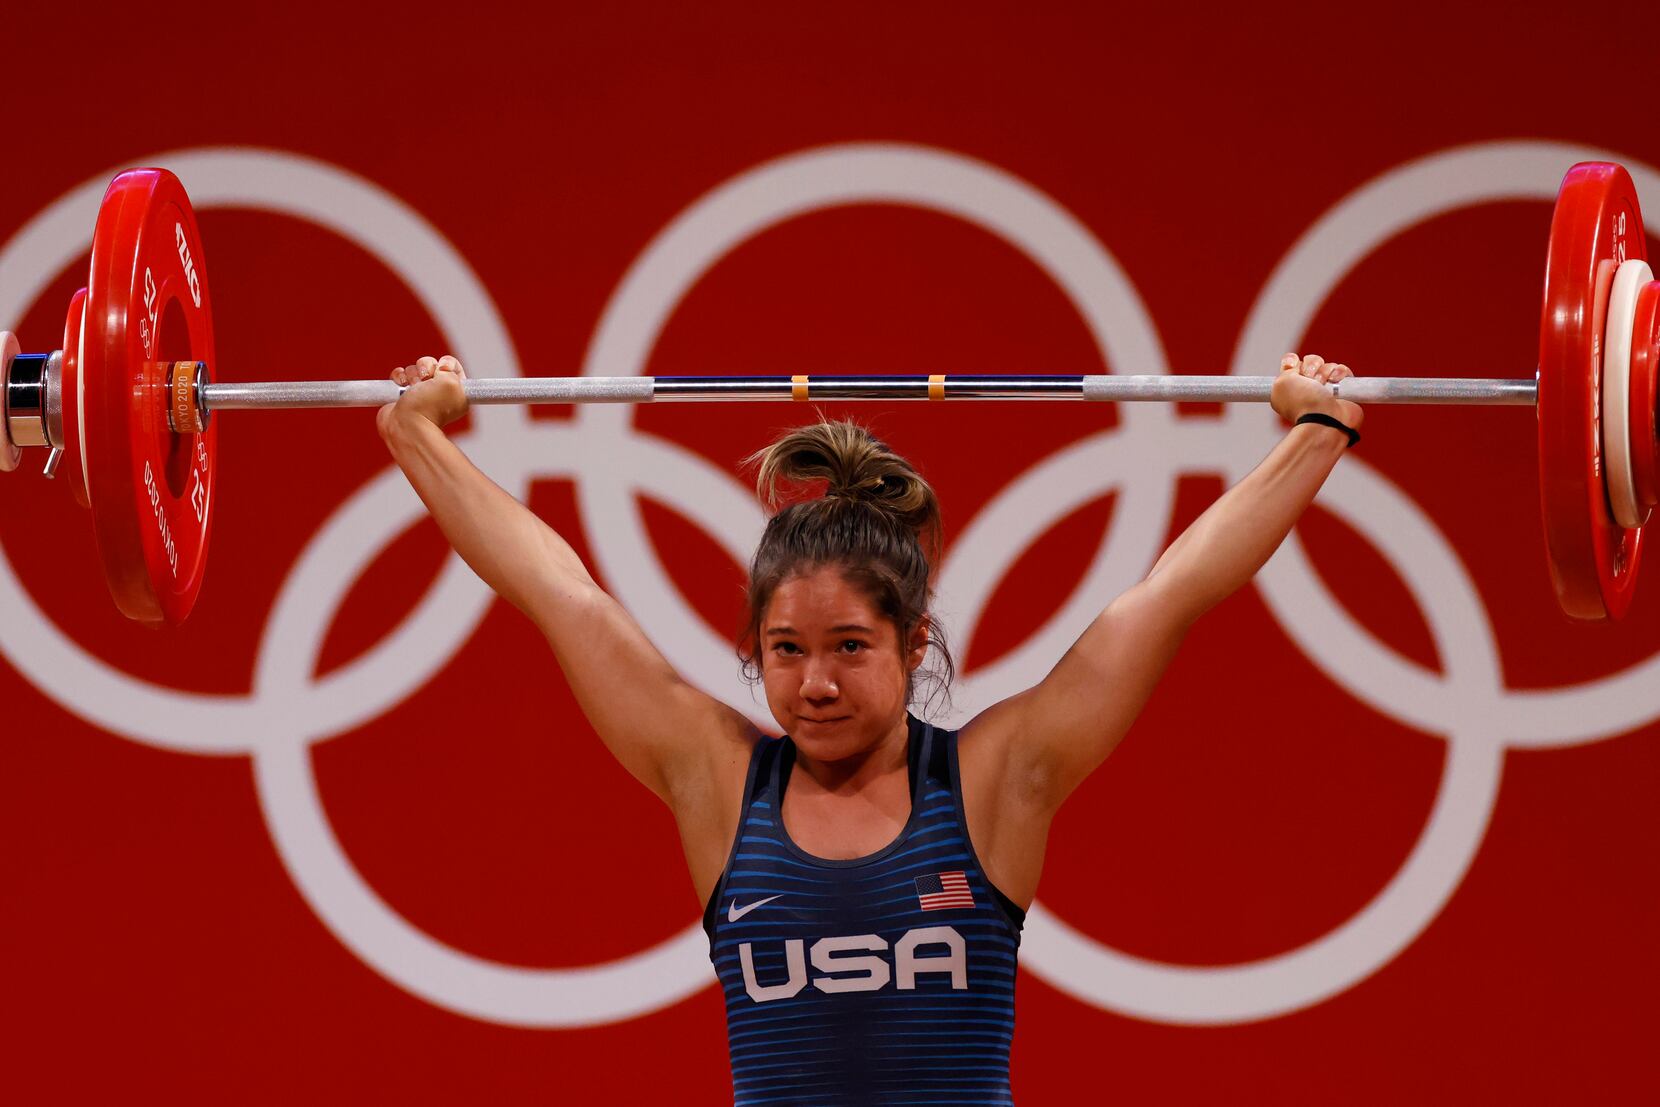 Weight Lifting, an Original Olympic Sport, May Be Dropped - The New York  Times